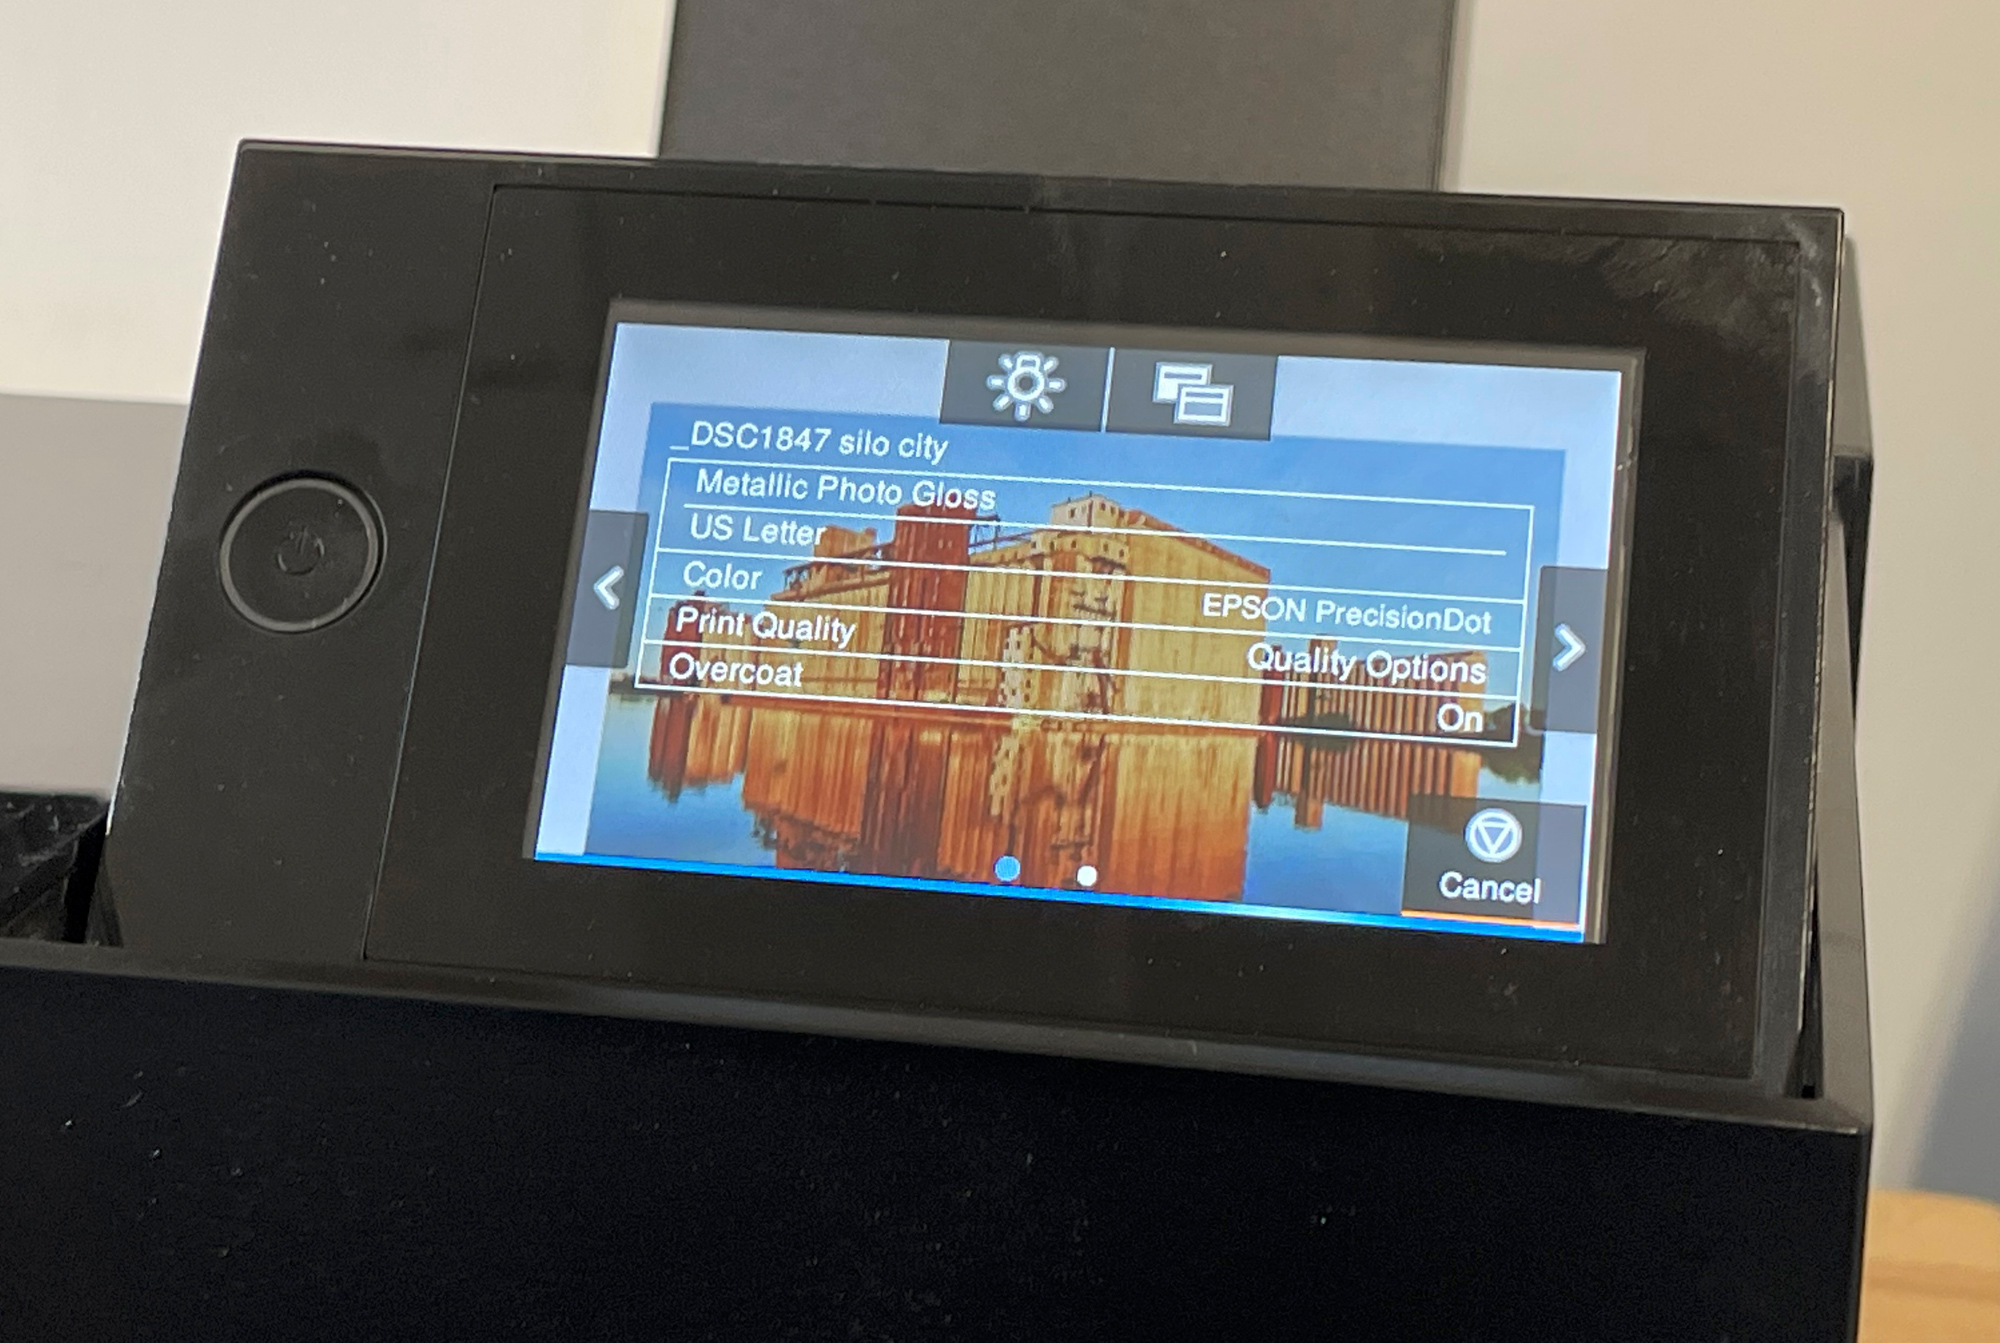 The LCD Screen on the printer shows the image as well as printing status